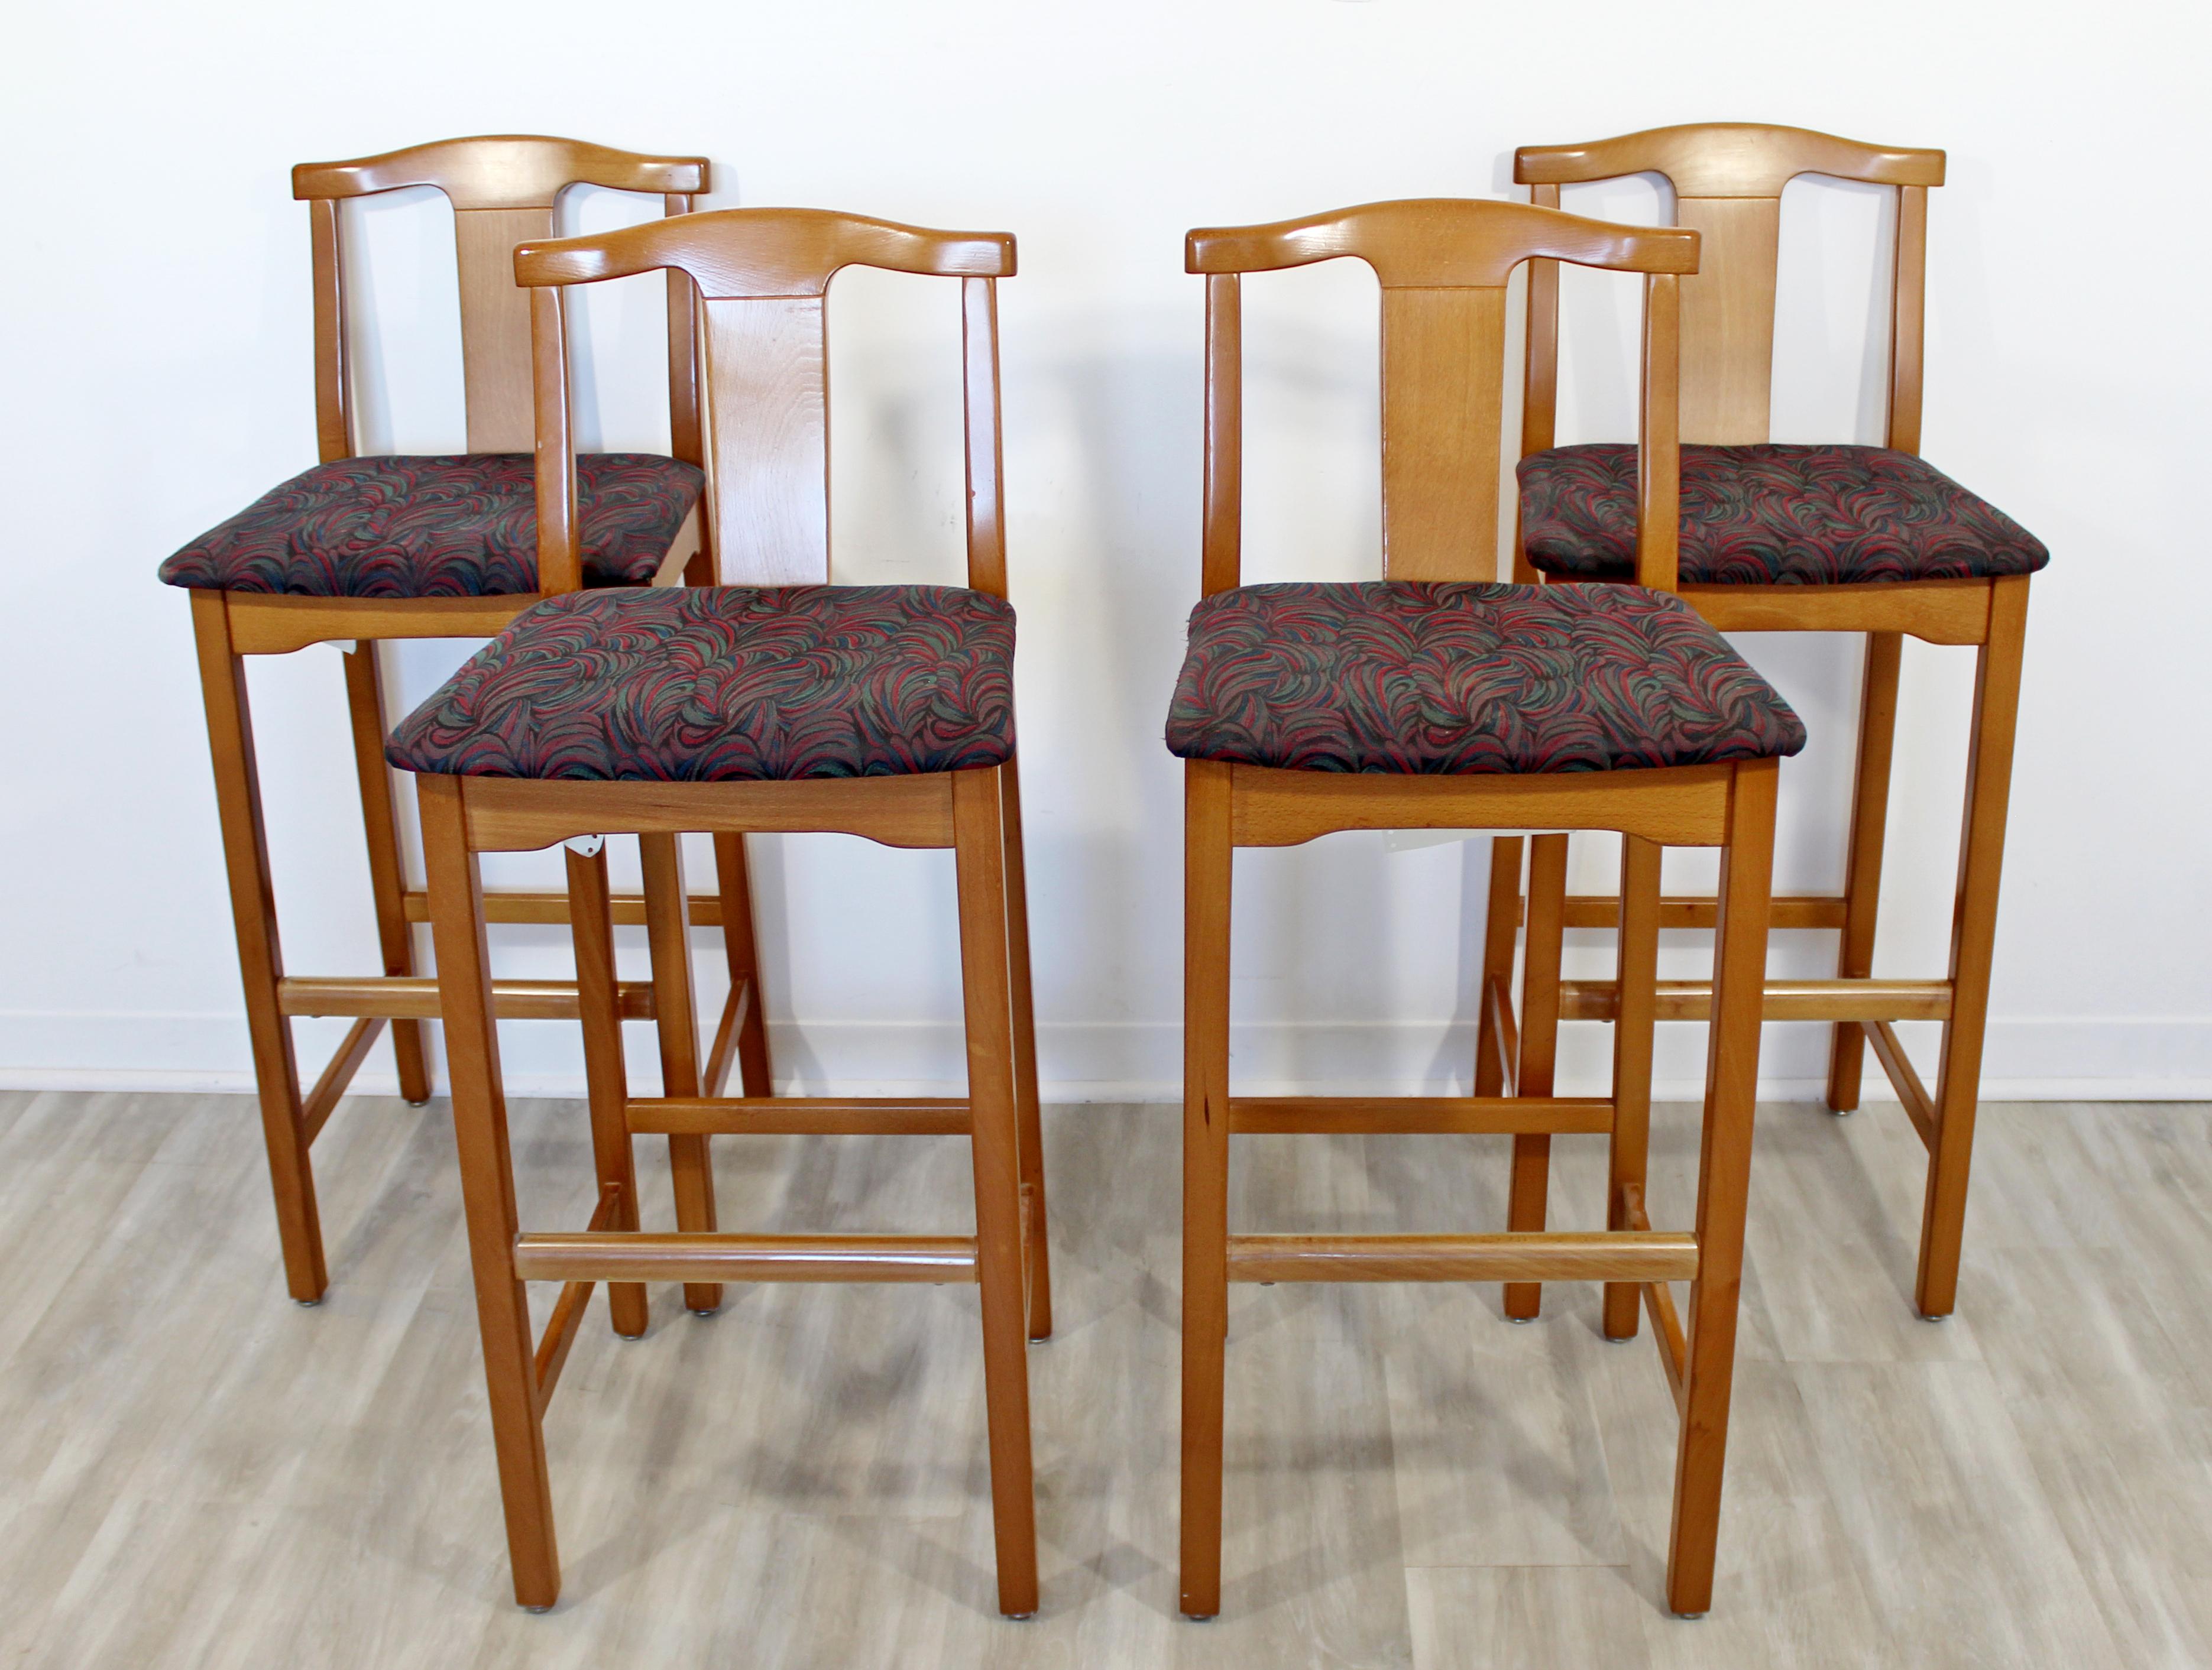 For your consideration is a stupendous set of four counter or bar stools, by Lowenstein, circa 1990s. In excellent condition. The dimensions are 17.5